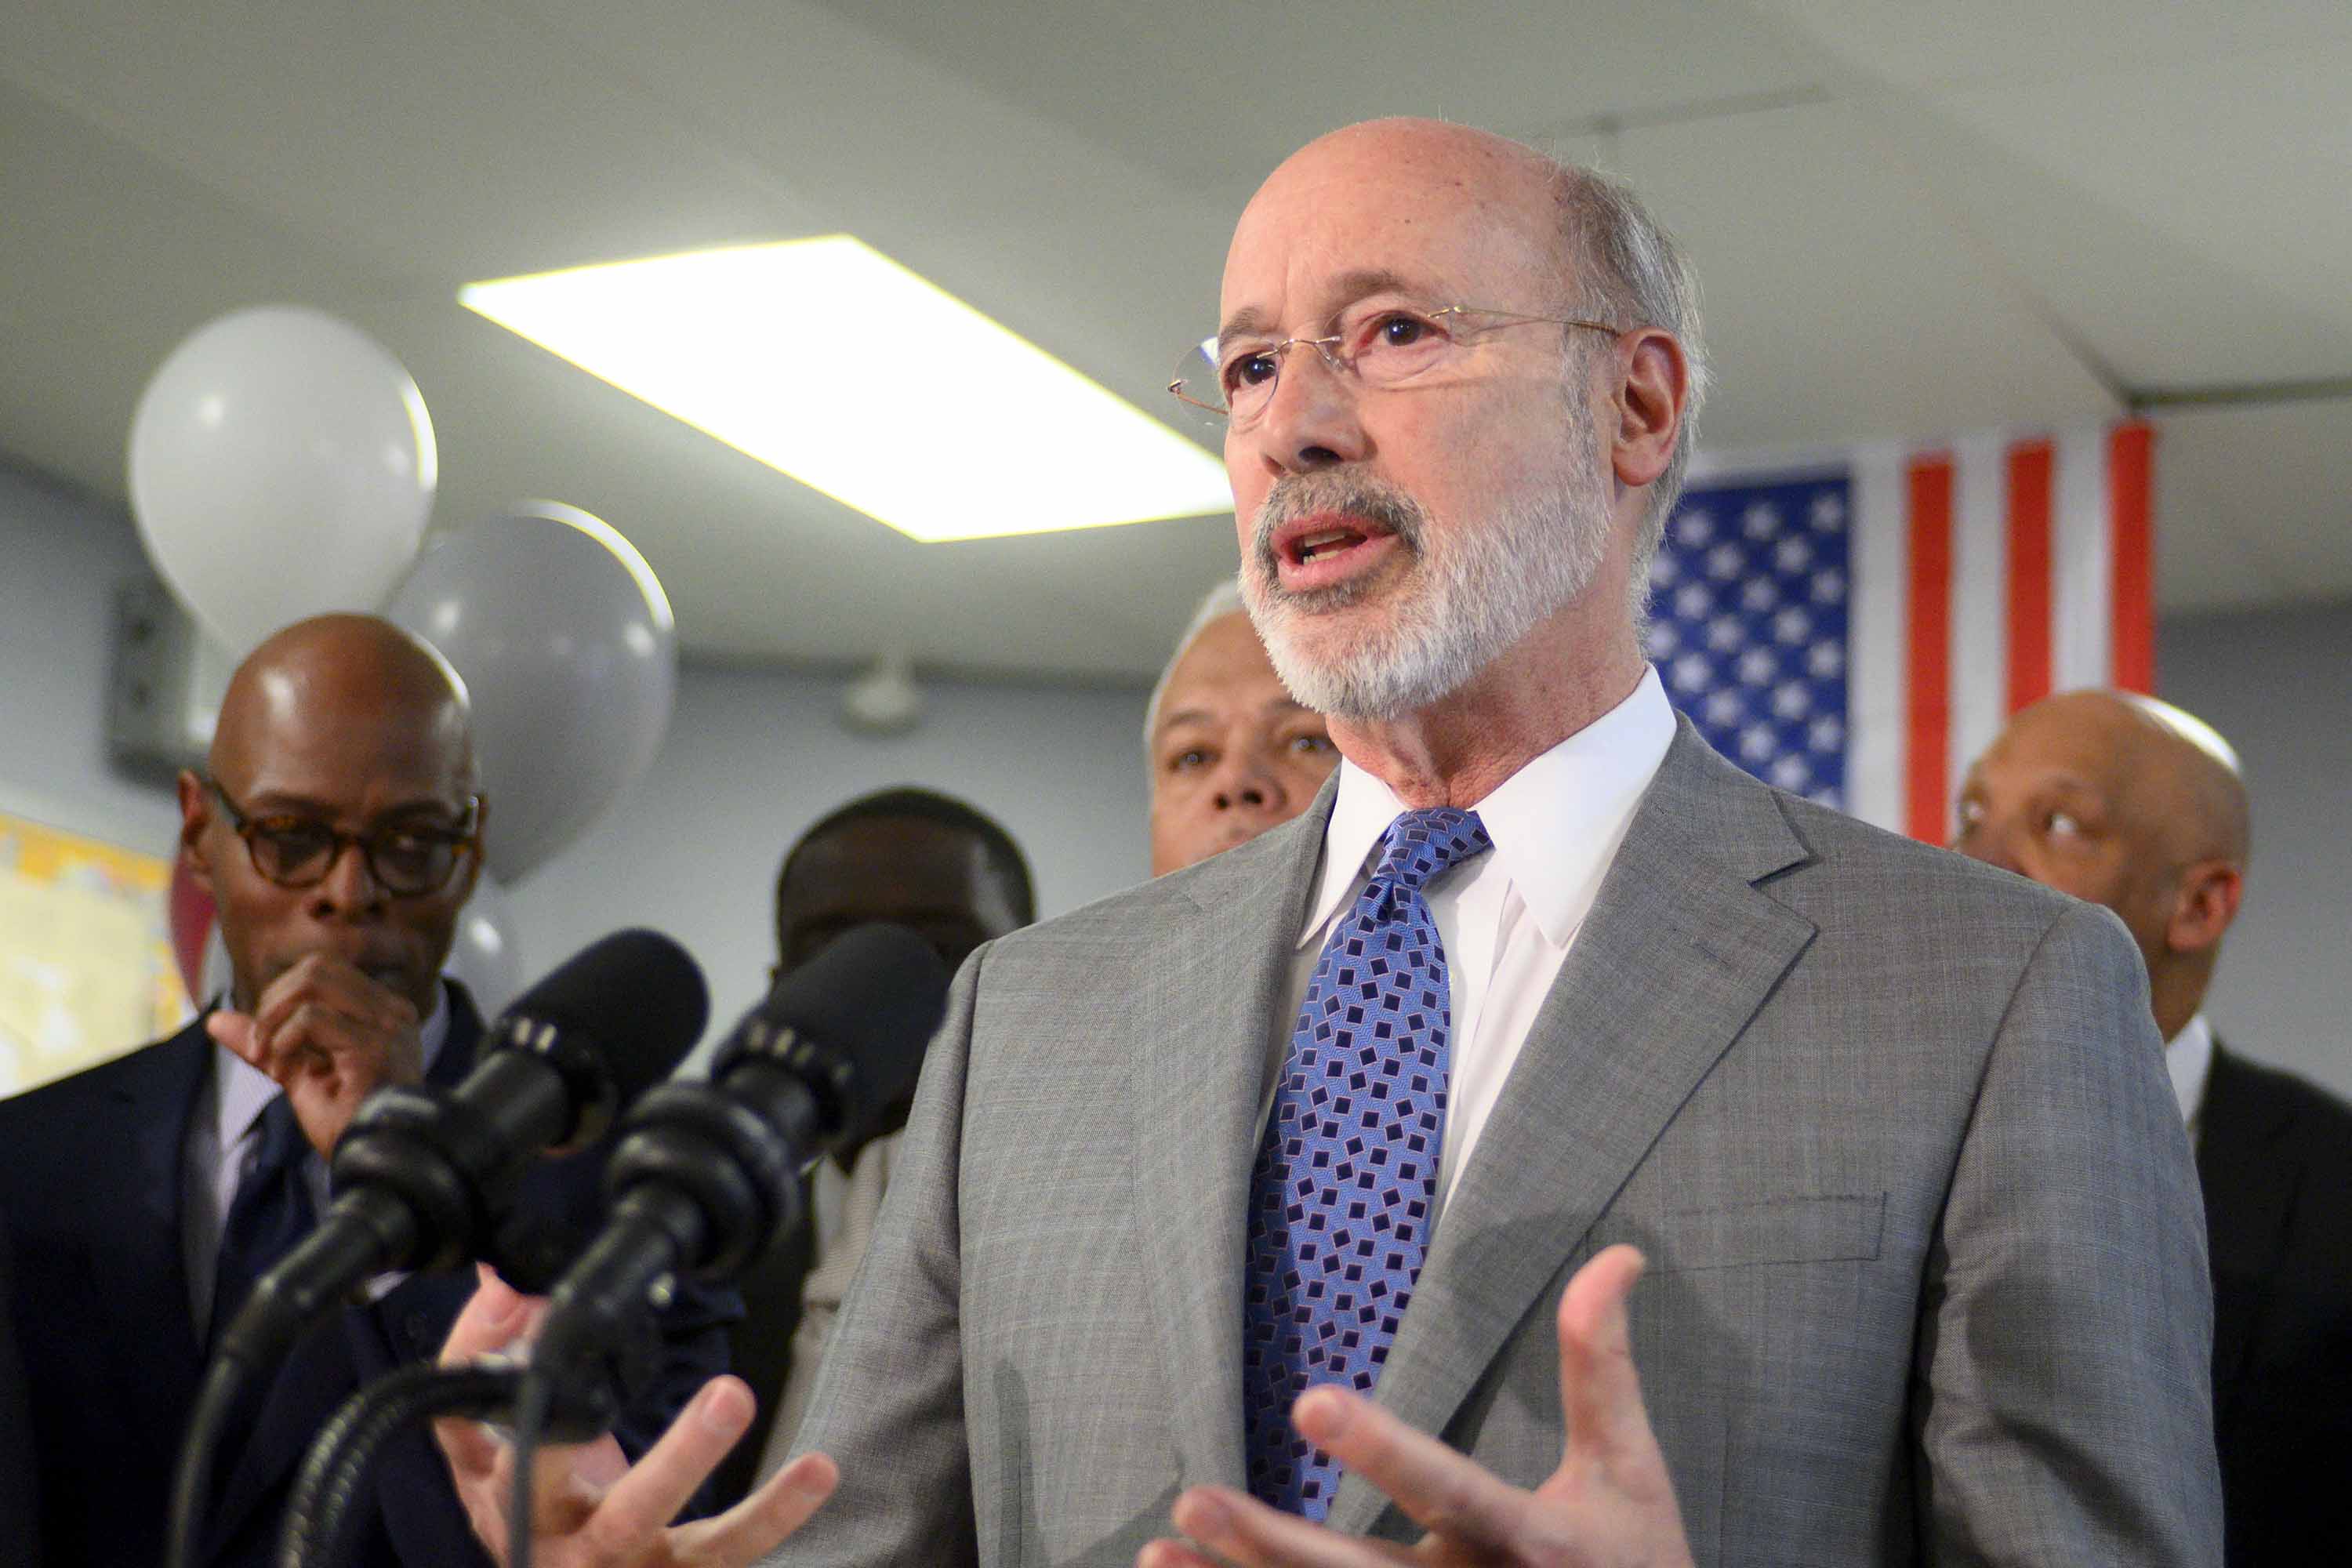 Pennsylvania Governor Tom Wolf speaks at an event in Philadelphia on February 28.